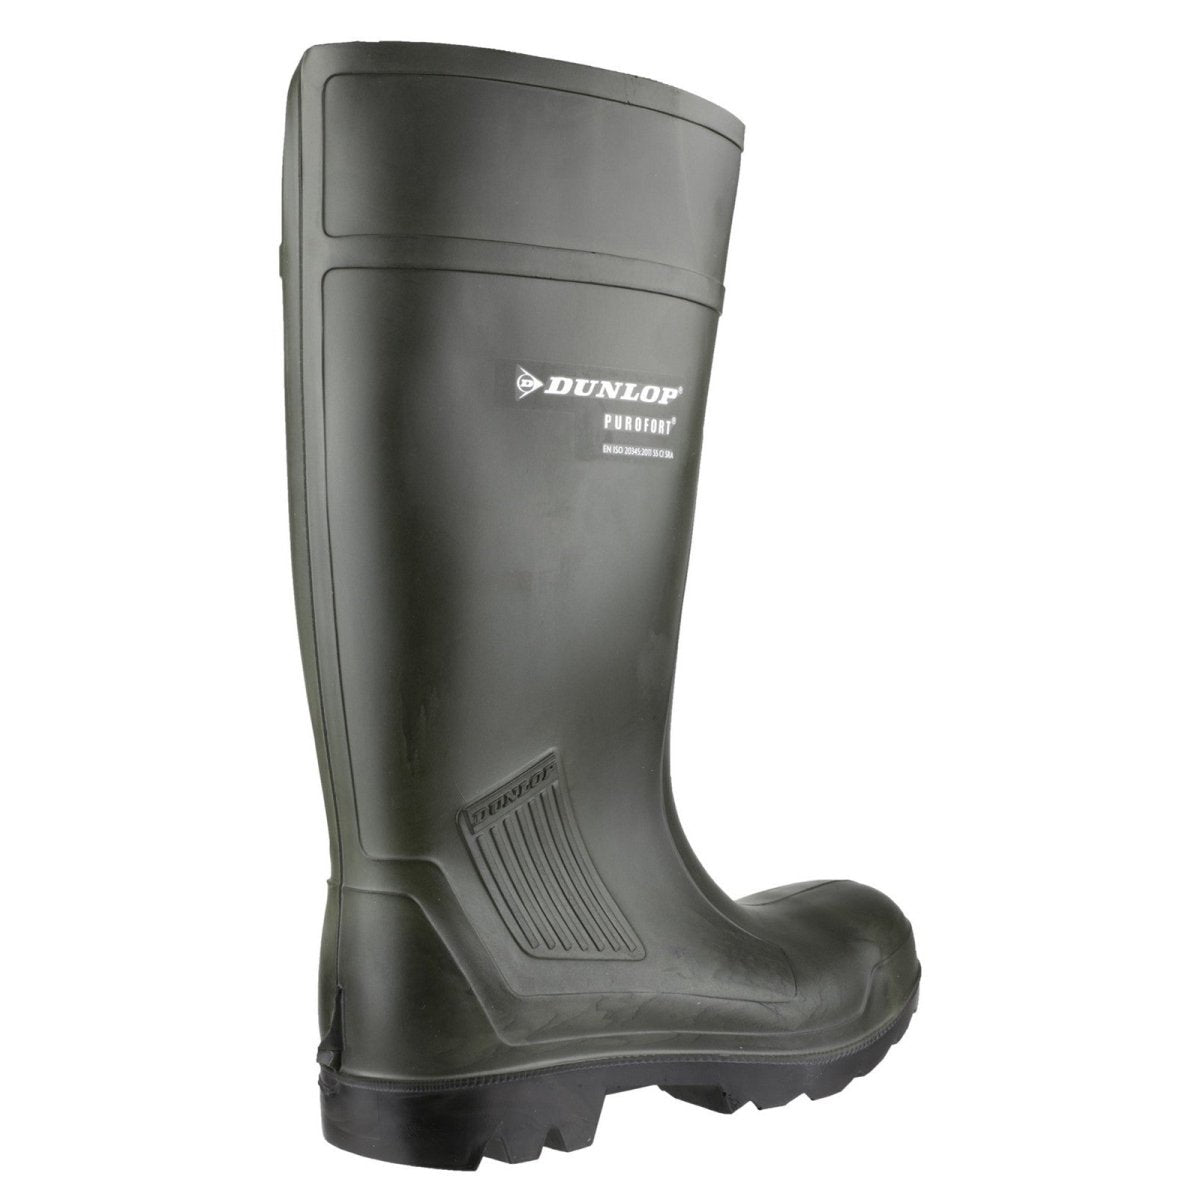 Dunlop Purofort Professional Full Safety Wellington Boots - Shoe Store Direct